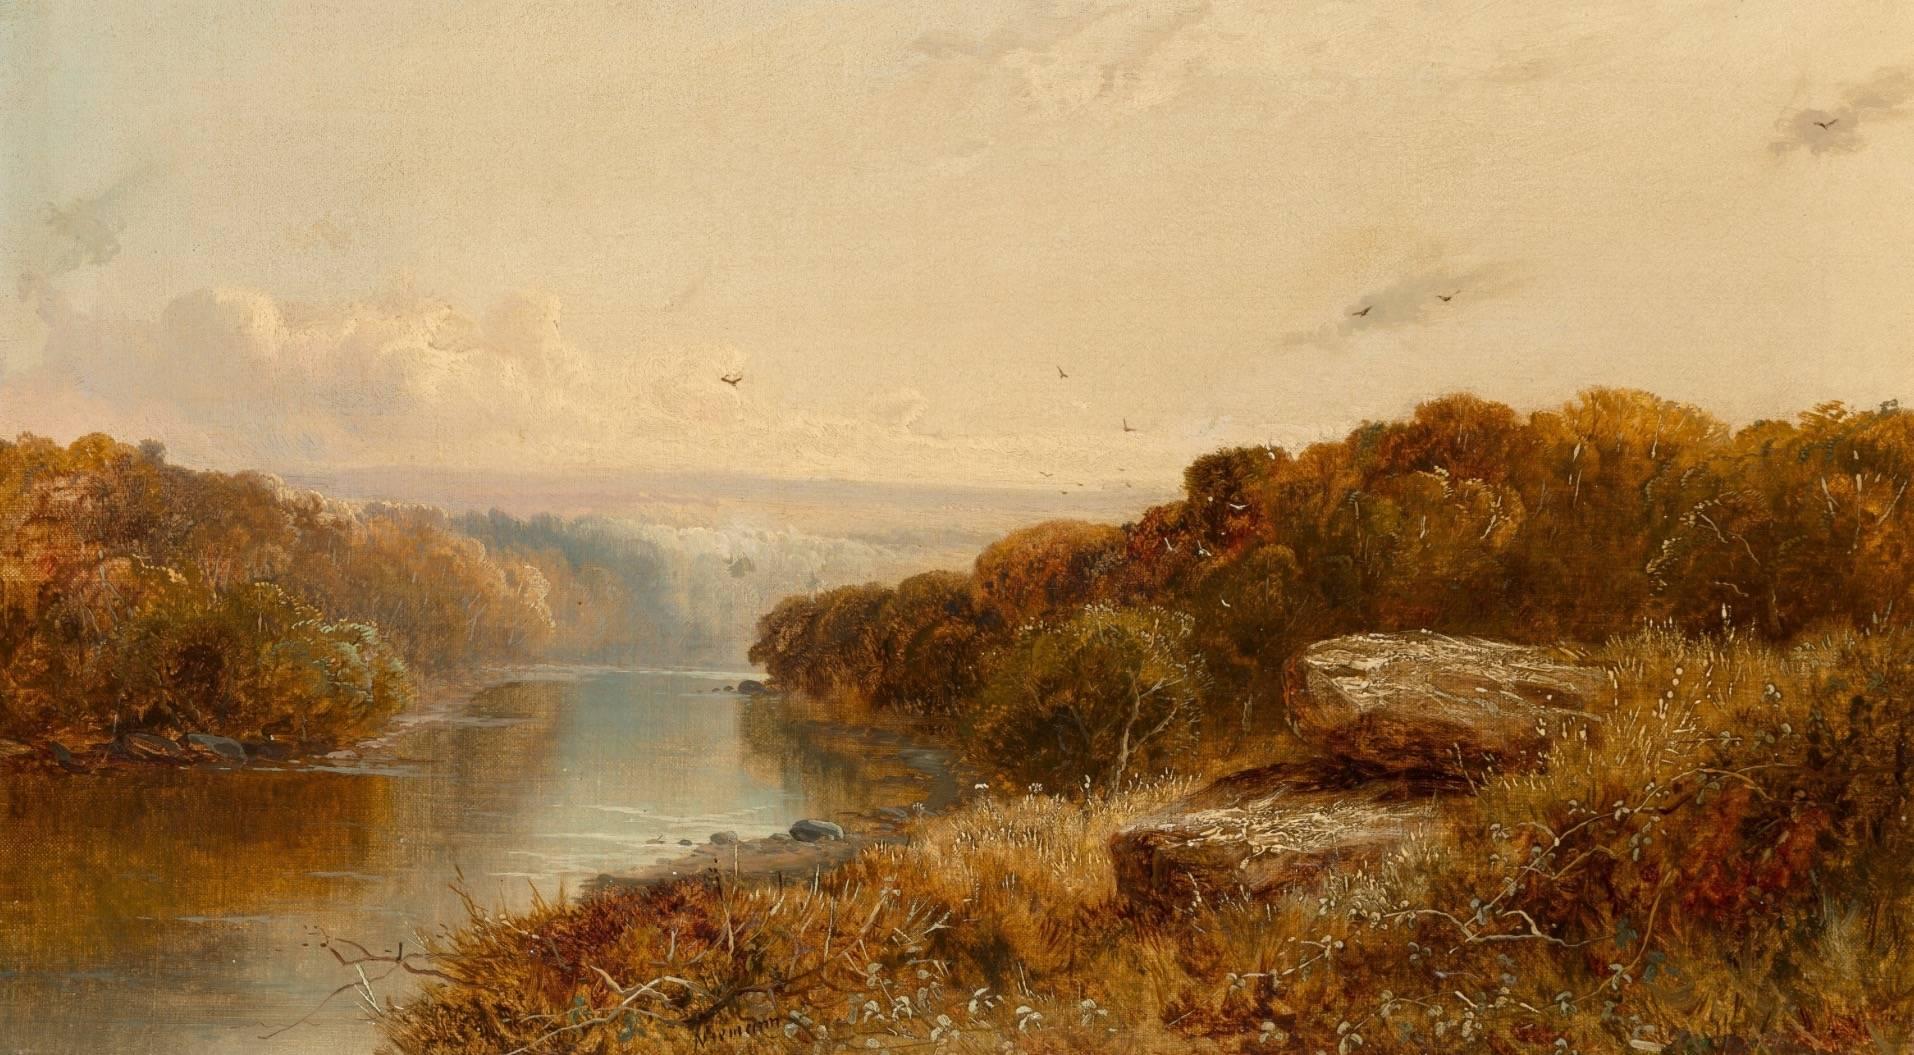 Edmund John Niemann (British, 1813-1876)
Shirley Brook, Yeaveley, Derbyshire.
Oil on canvas.

Measures: 14 x 24 inches (35.6 x 61.0 cm).

Signed lower center: Niemann.

Glue-lined canvas; there appears to be faint craquelure as well as light